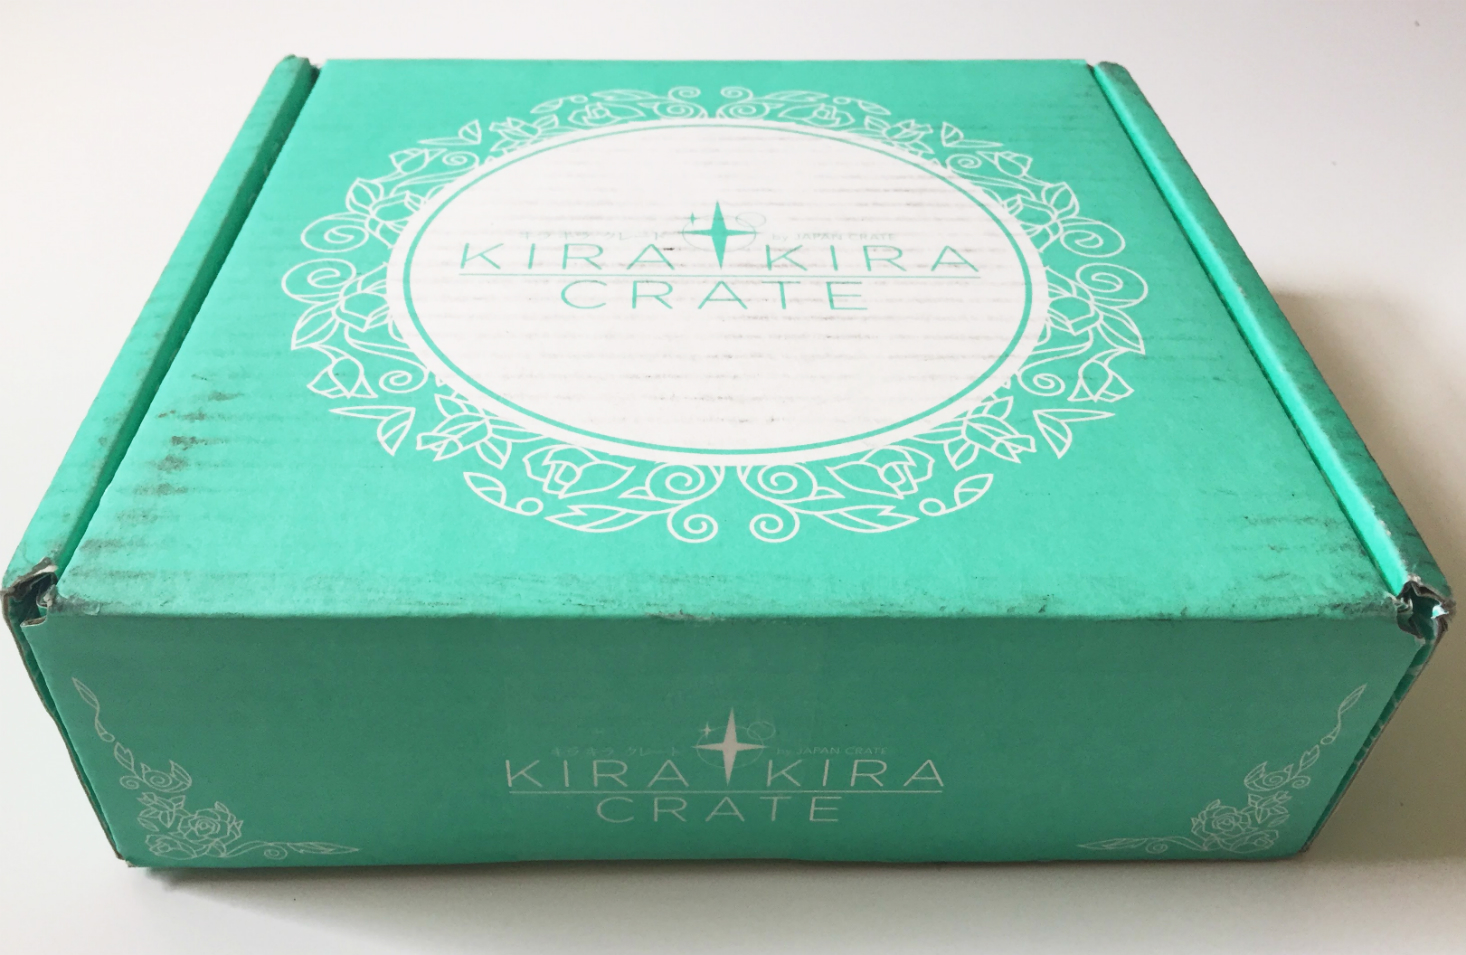 Kira Kira Crate by Japan Crate Review + Coupon – March 2018